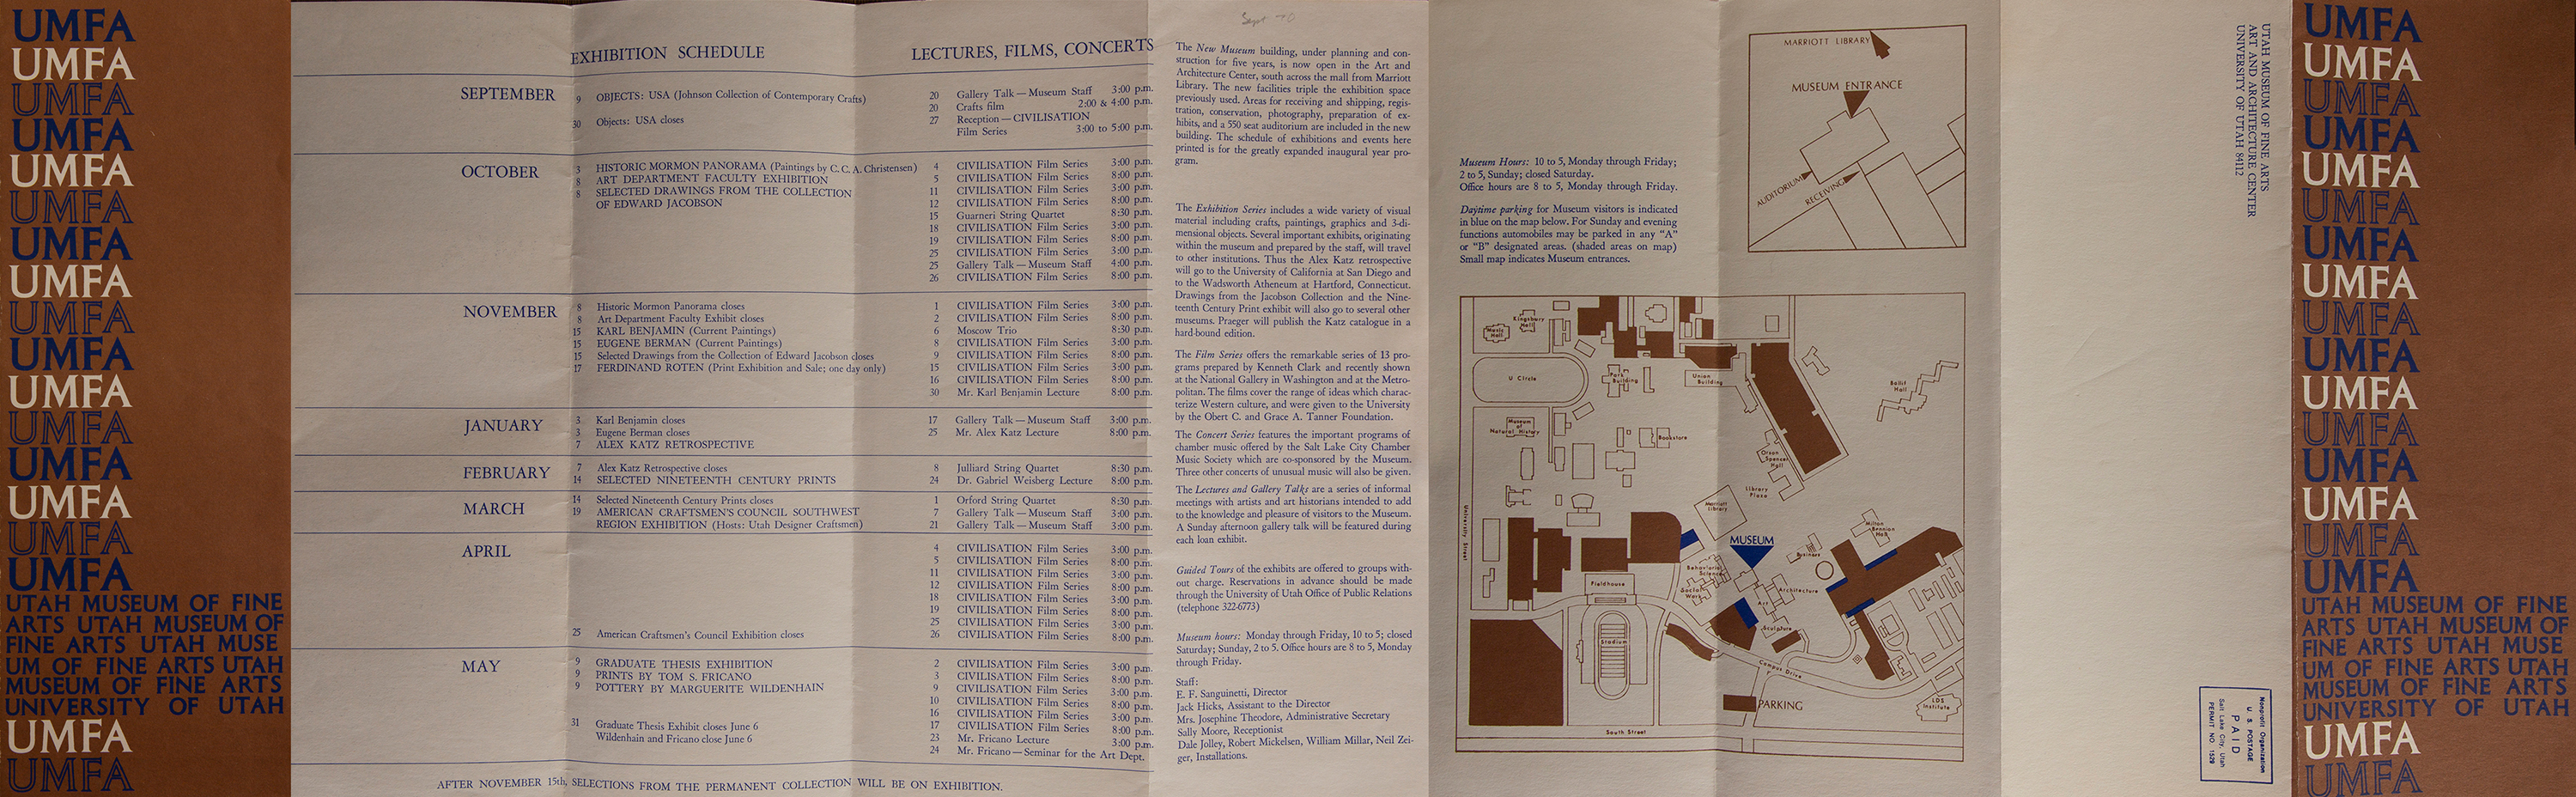 UMFA Exhibition Schedule brochure, 1970. University of Utah Facilities Planning and Construction Office records, Acc. 0416, Box 9, Building Files: Art and Architecture—Loose Material, 1968-73. University Archives and Records Management. J. Willard Marriott Library, the University of Utah.